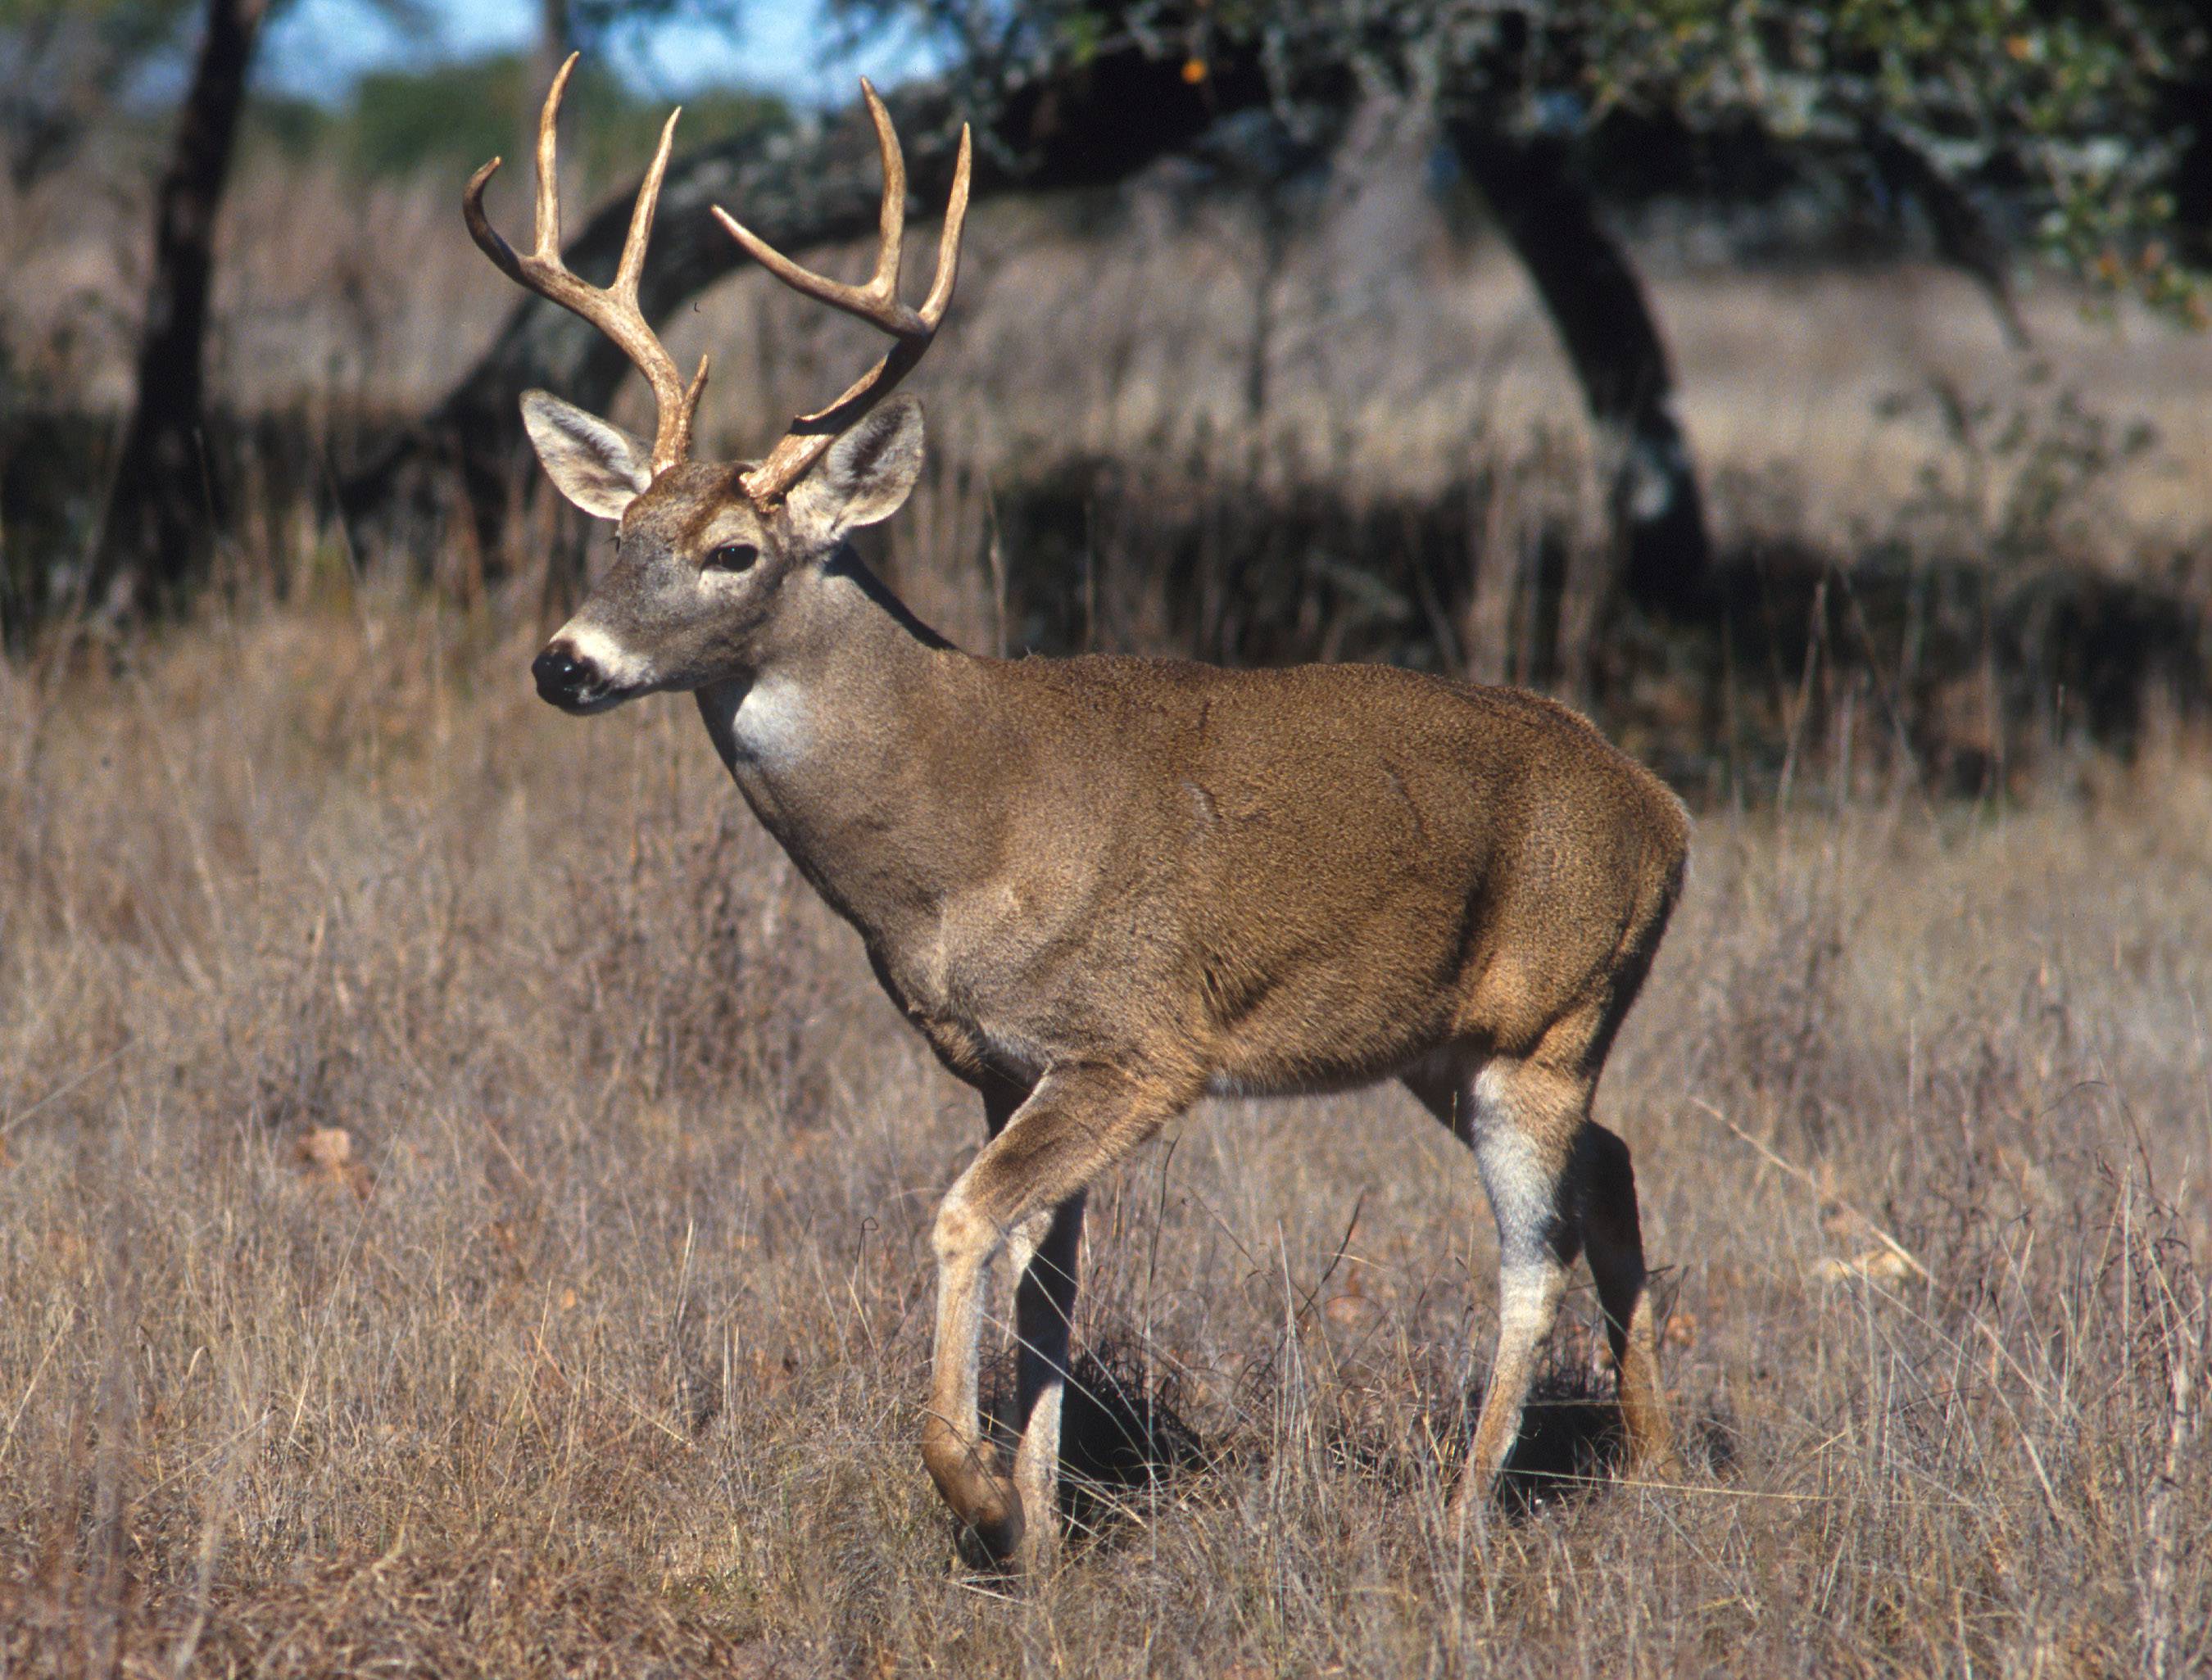 Pointer whitetail deer wallpaper - - High Quality and other